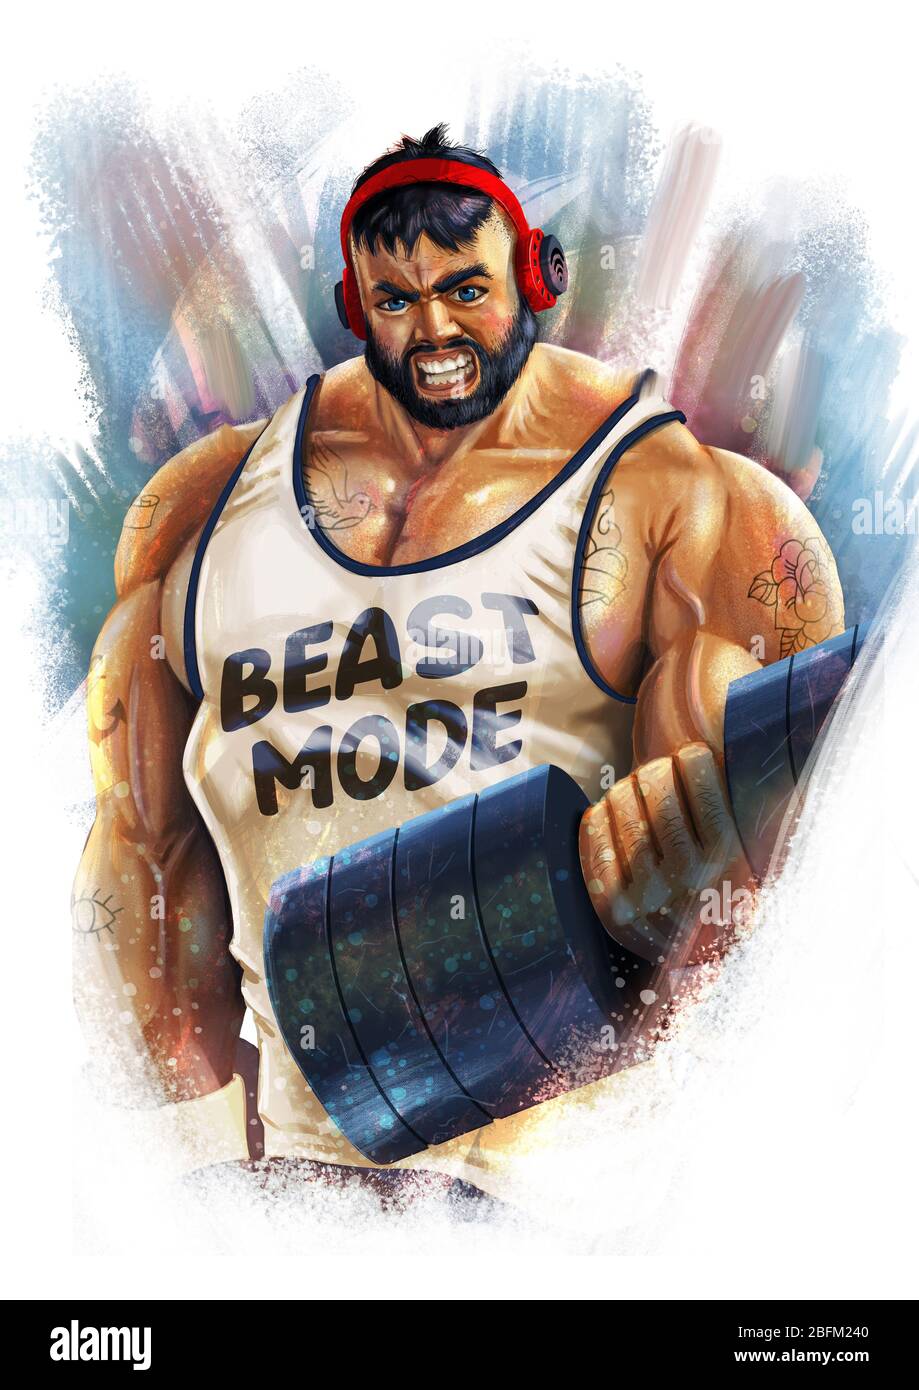 Digital illustration of muscular man with tattoo's and headphones and beast  mode written on his vest lifting weights Stock Photo - Alamy